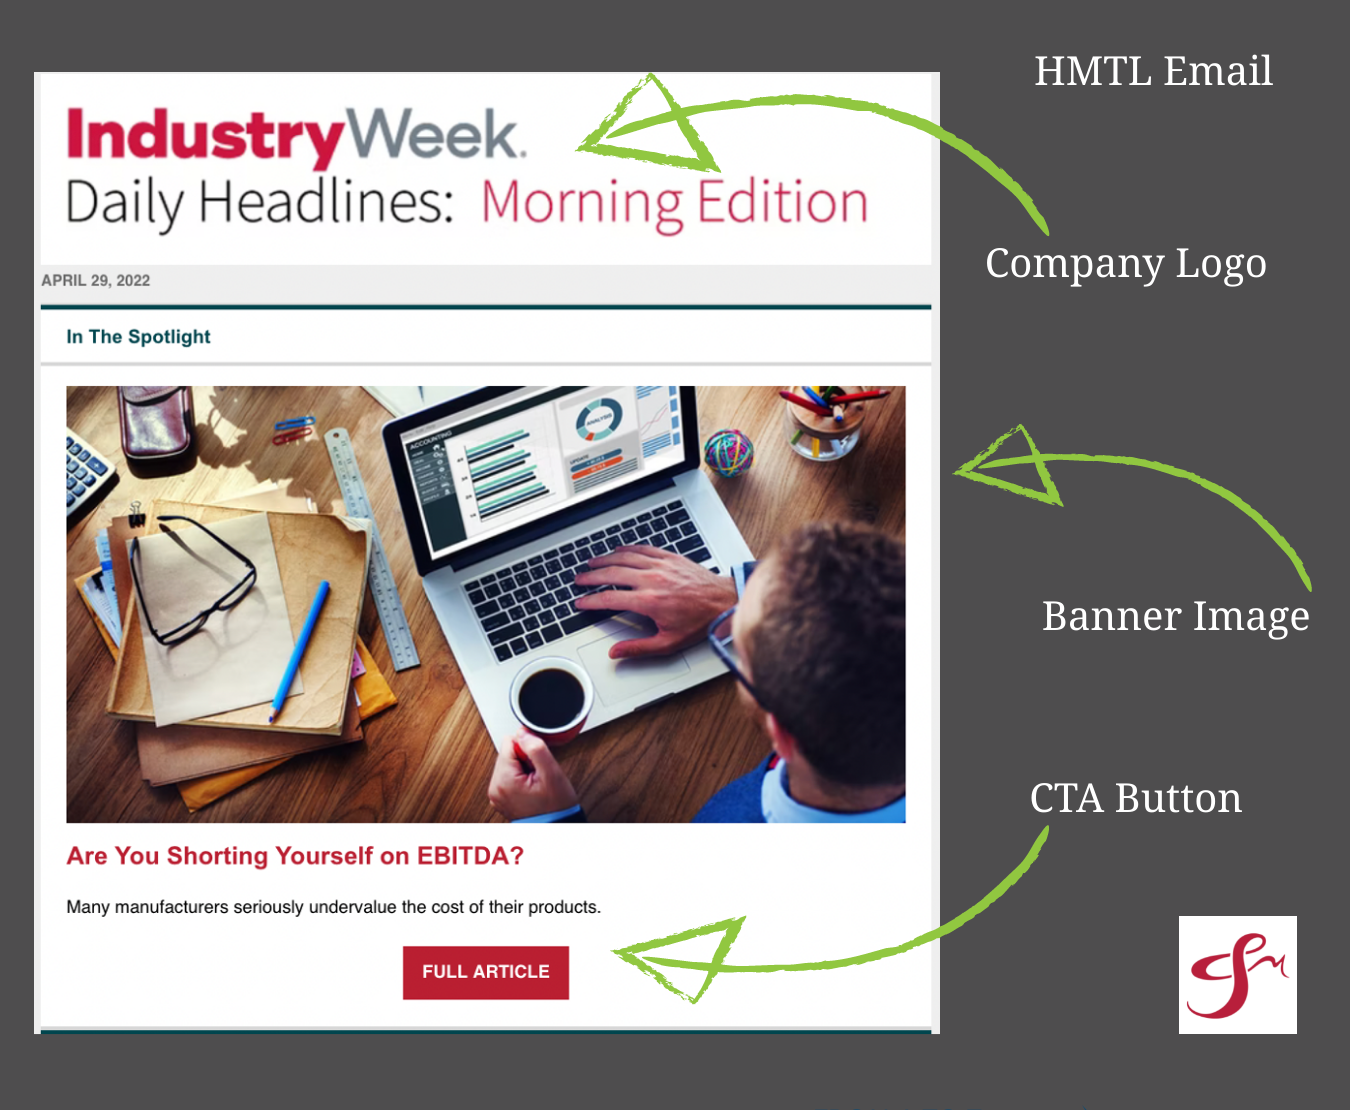 An HTML email by Industry Week with labeled arrows pointing to parts of the email template.